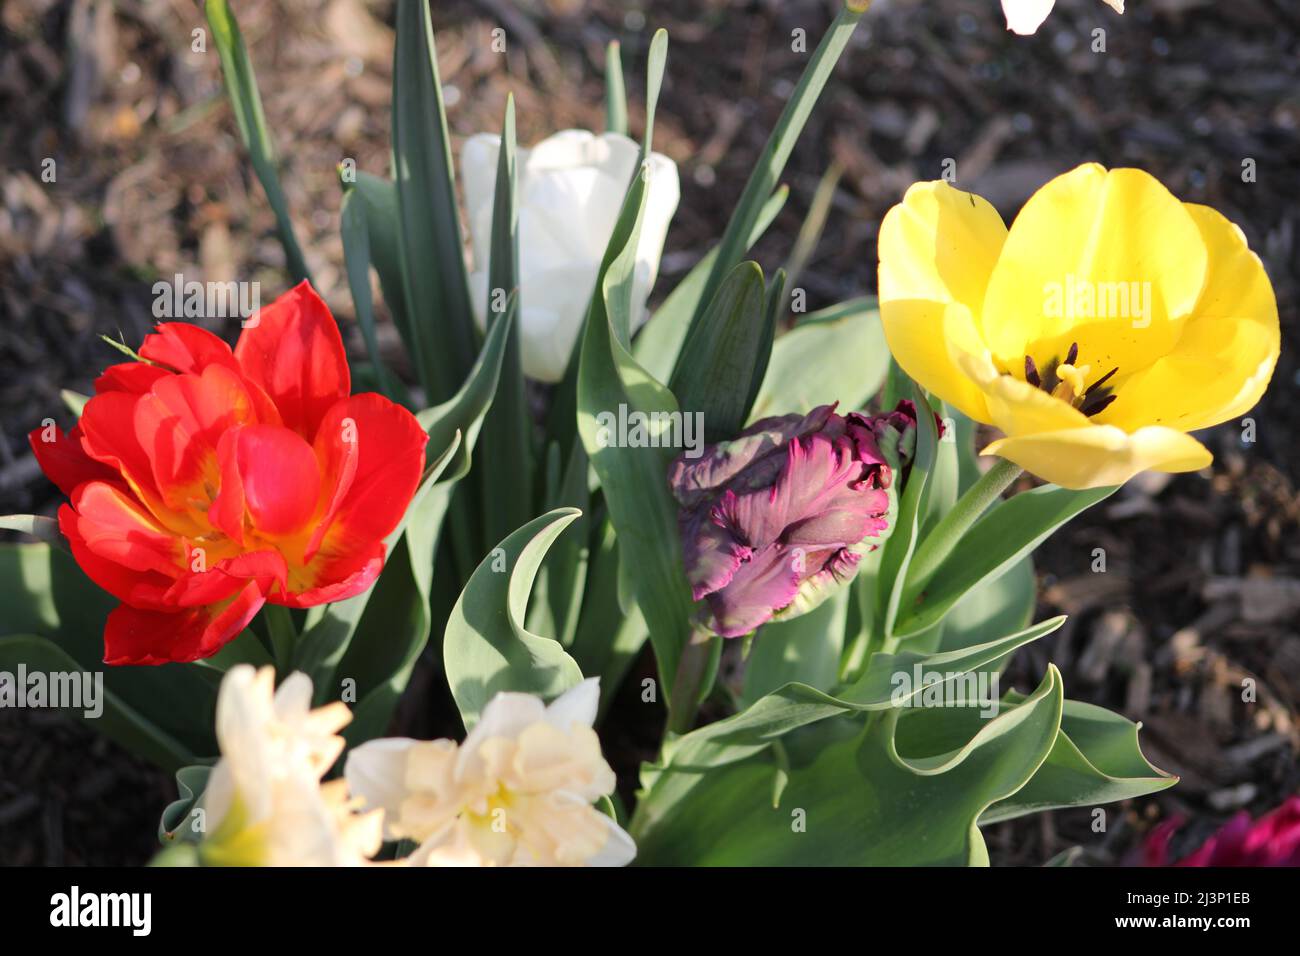 Tulips on the grounds of Biltmore Estates Stock Photo